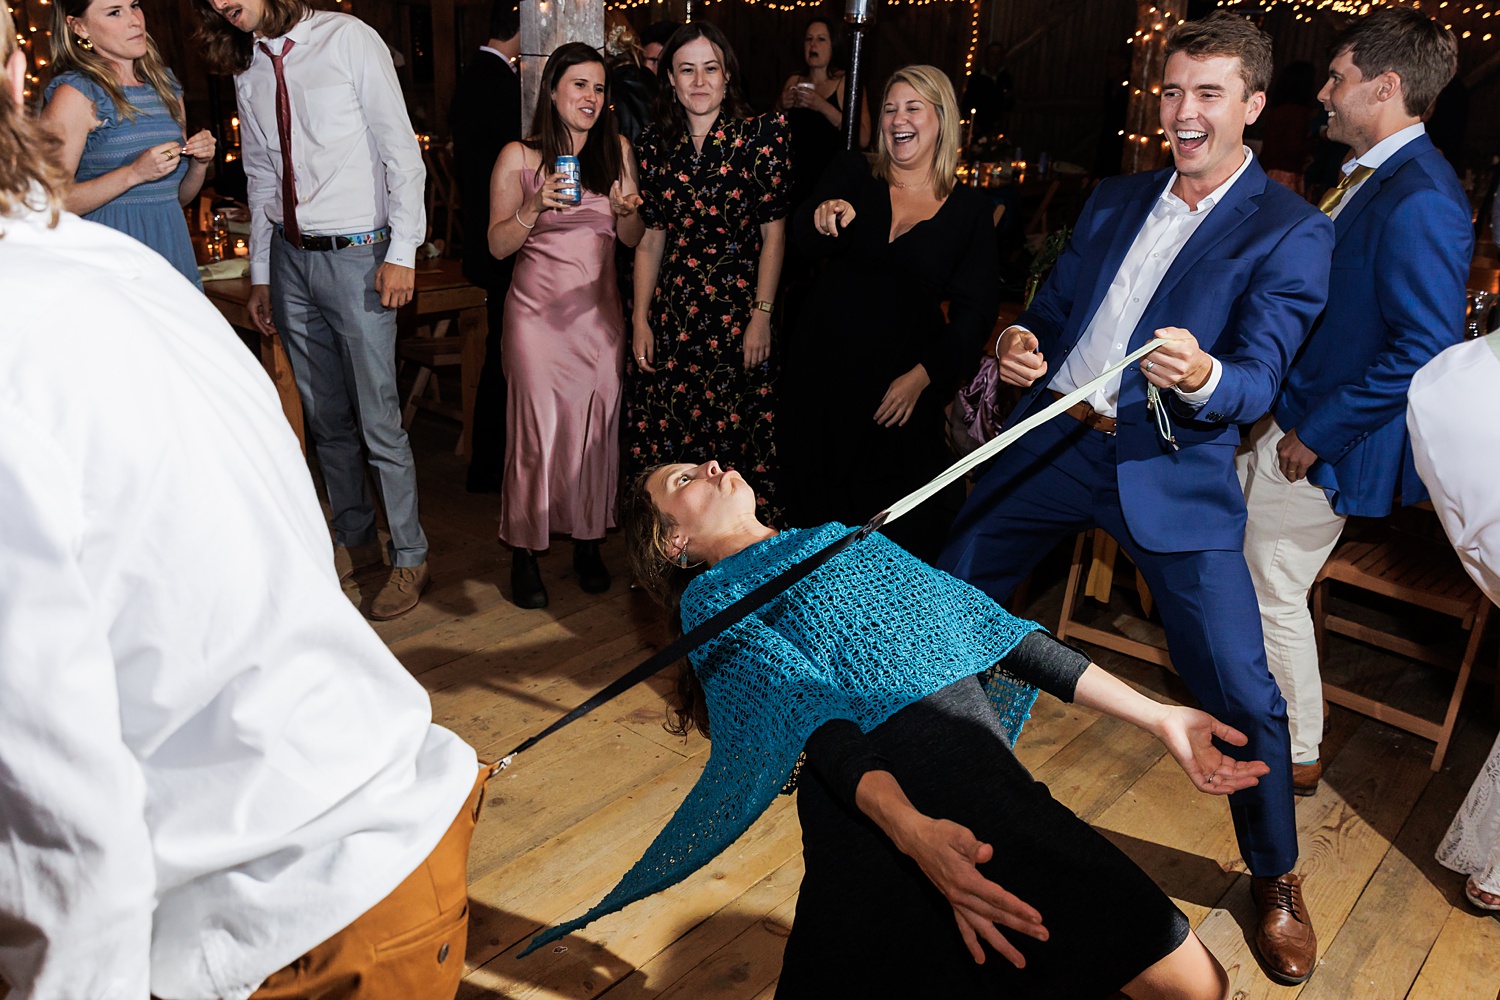 Limbo games using a groomsman's suspenders at the fall wedding reception